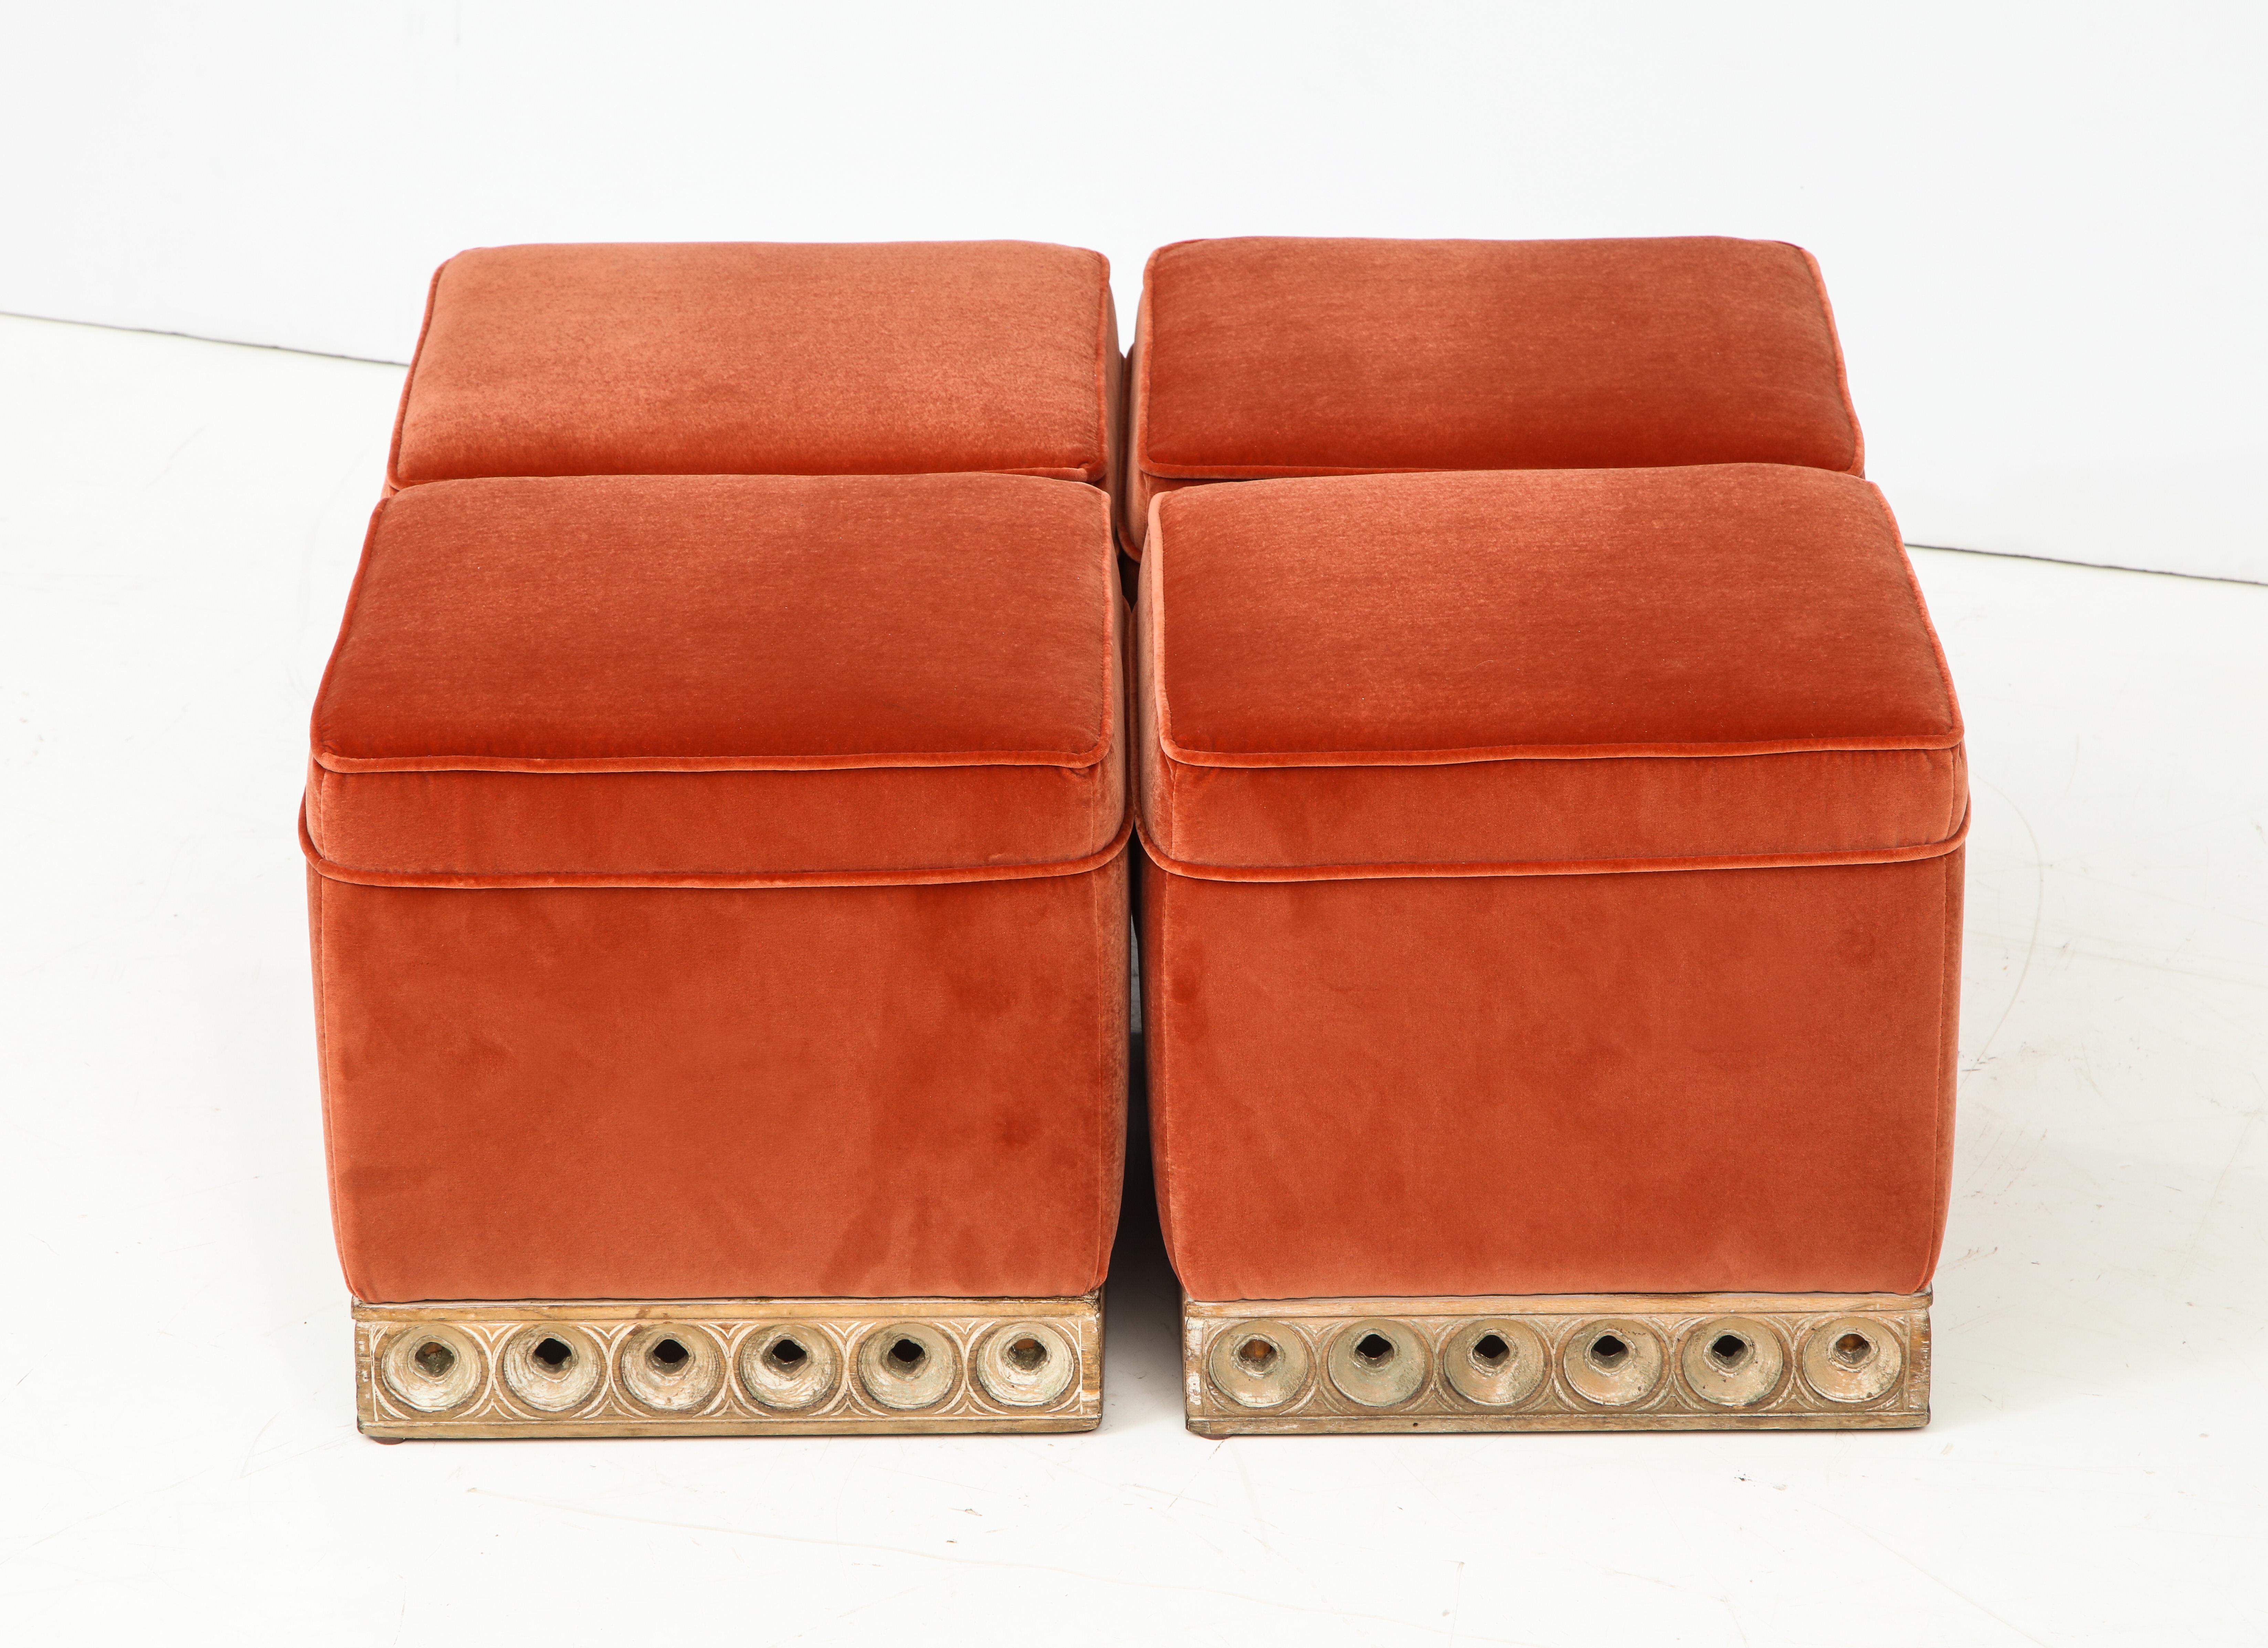 These Italian mid-century modern poufs or stools with wooden carved base are absolutely chic and versatile. A set of four which can be grouped as a single ottoman or individually. Completely restored and newly upholstered in a Vermillion or burnt